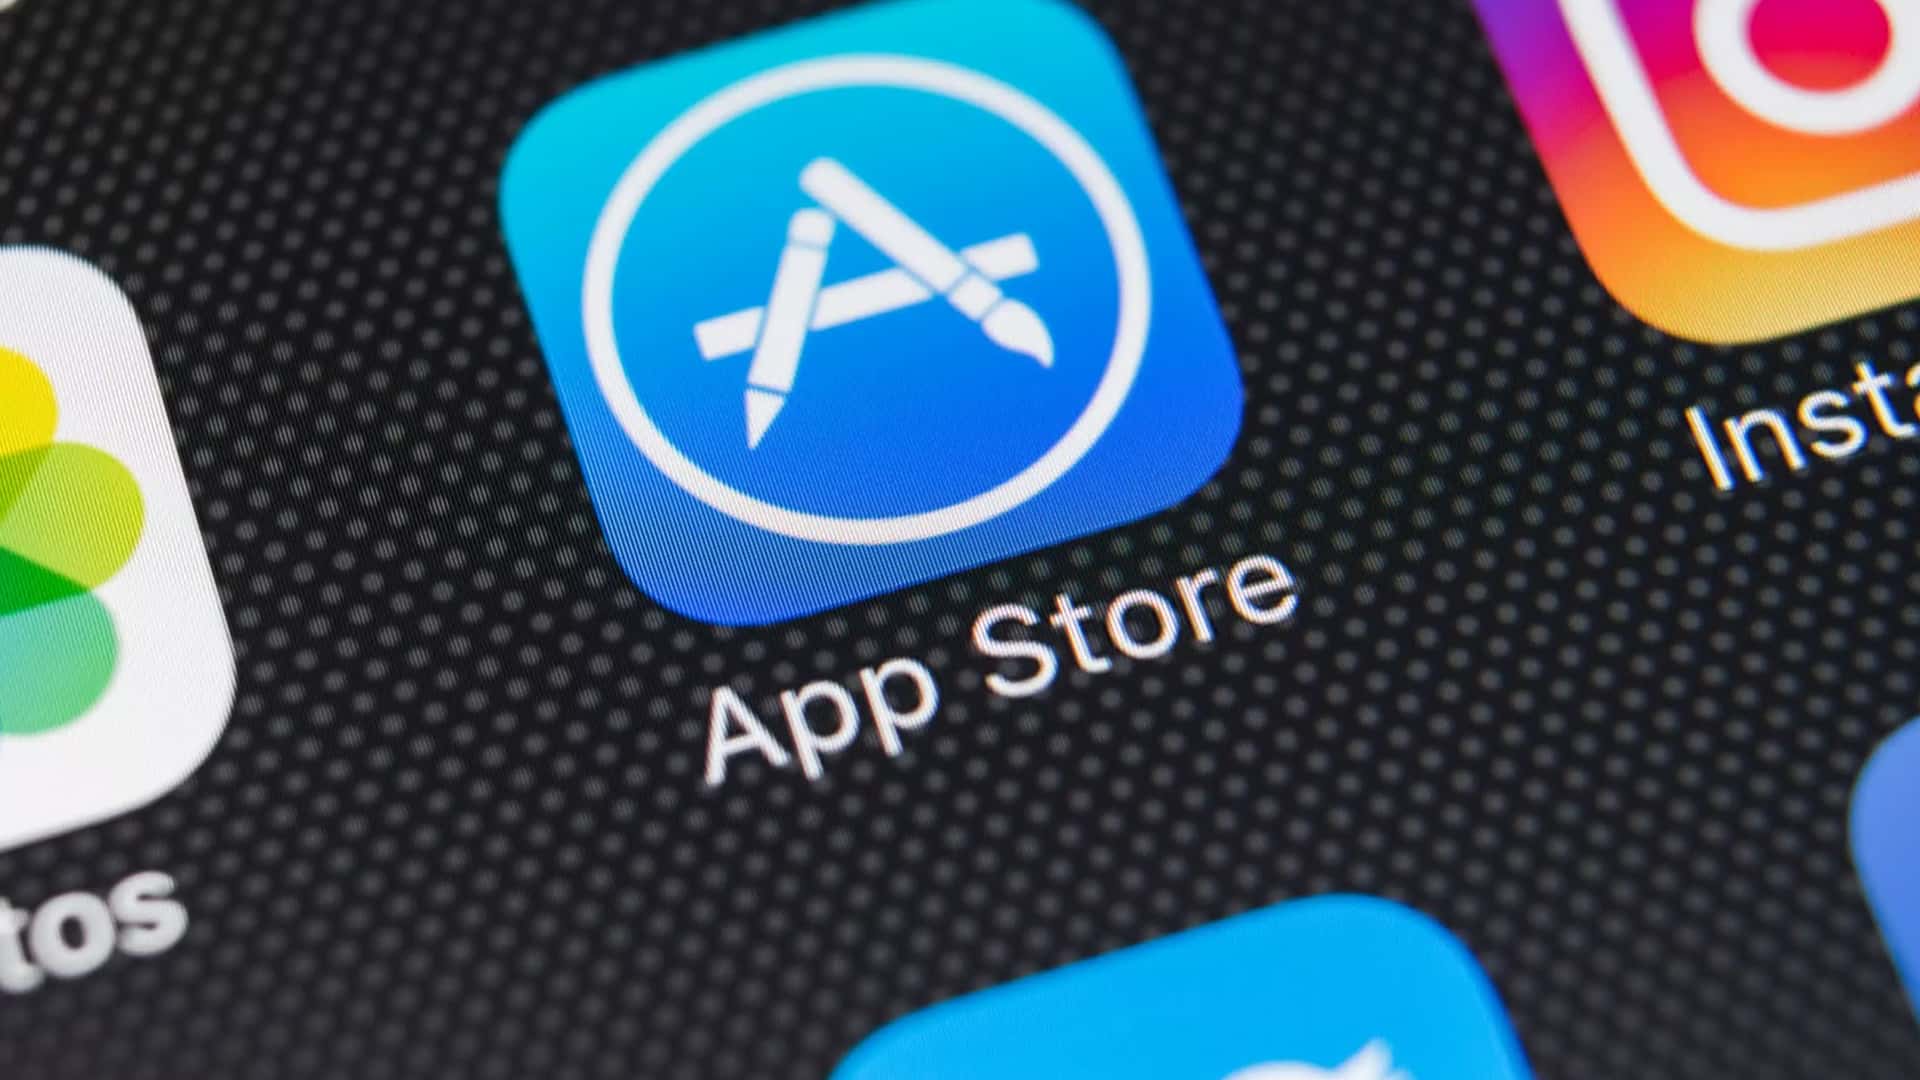 Apple cuts App Store commission to 15% for small businesses